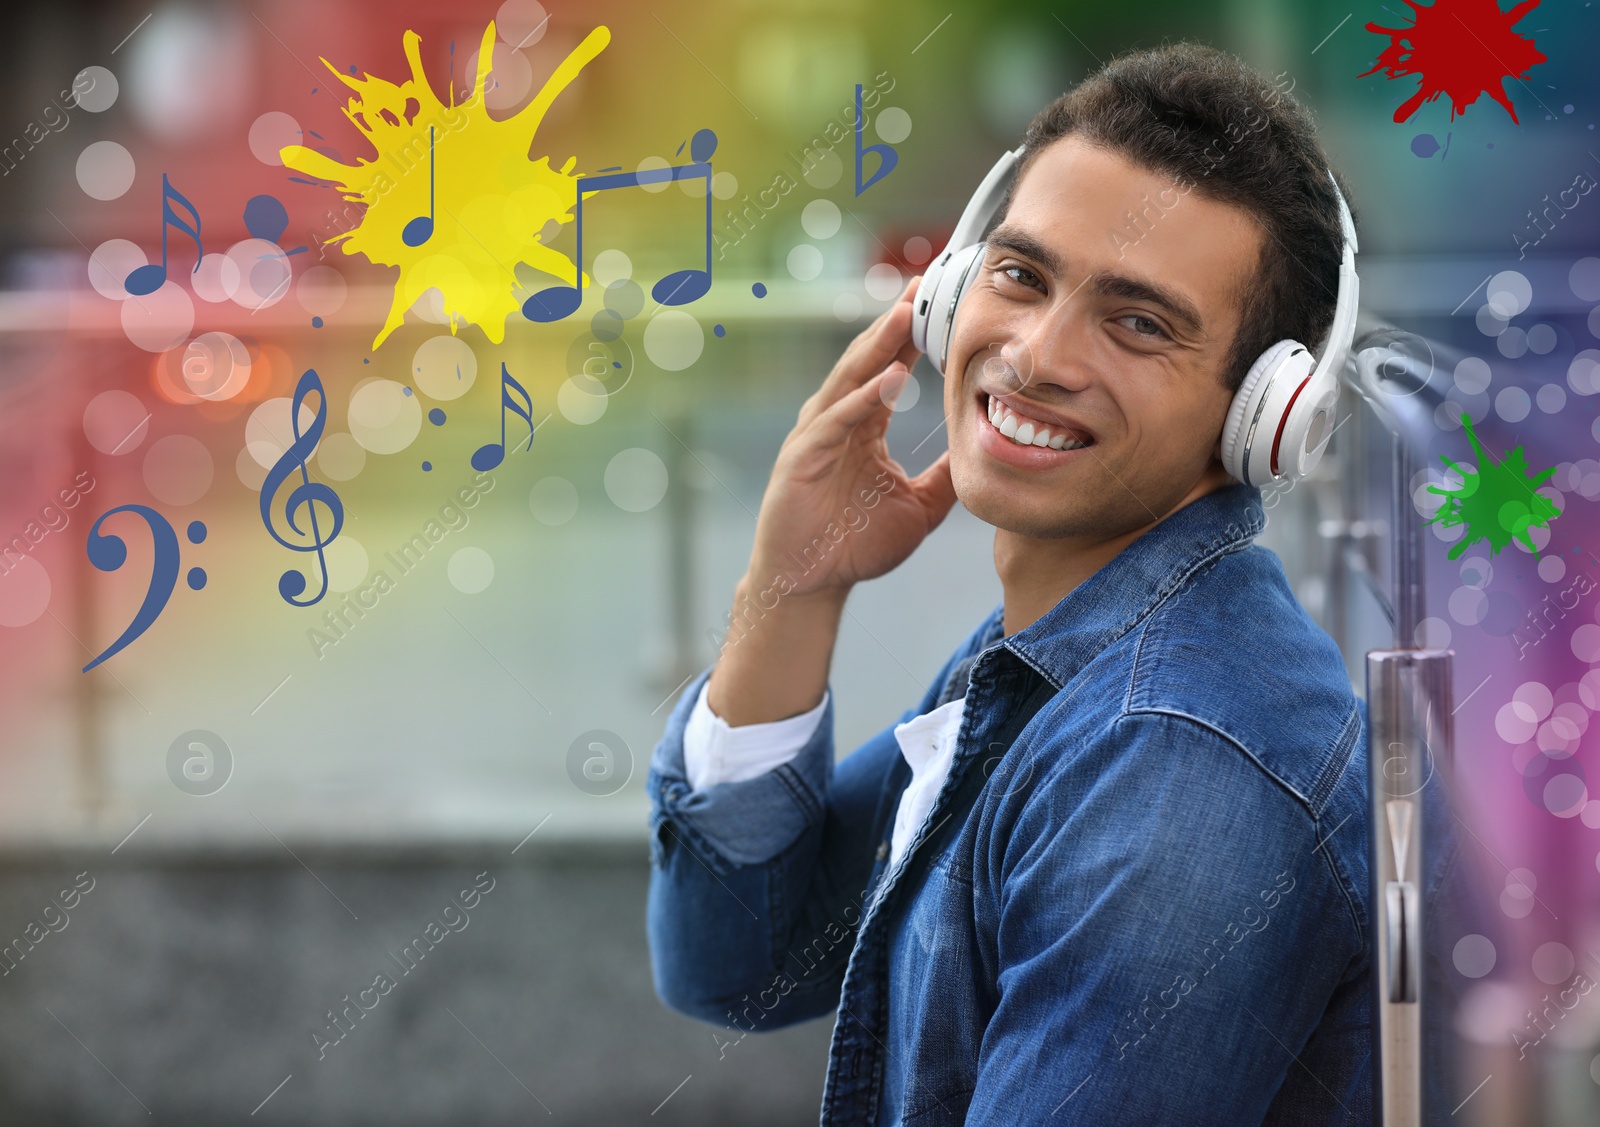 Image of Young African-American man listening to music outdoors. Bright notes illustration